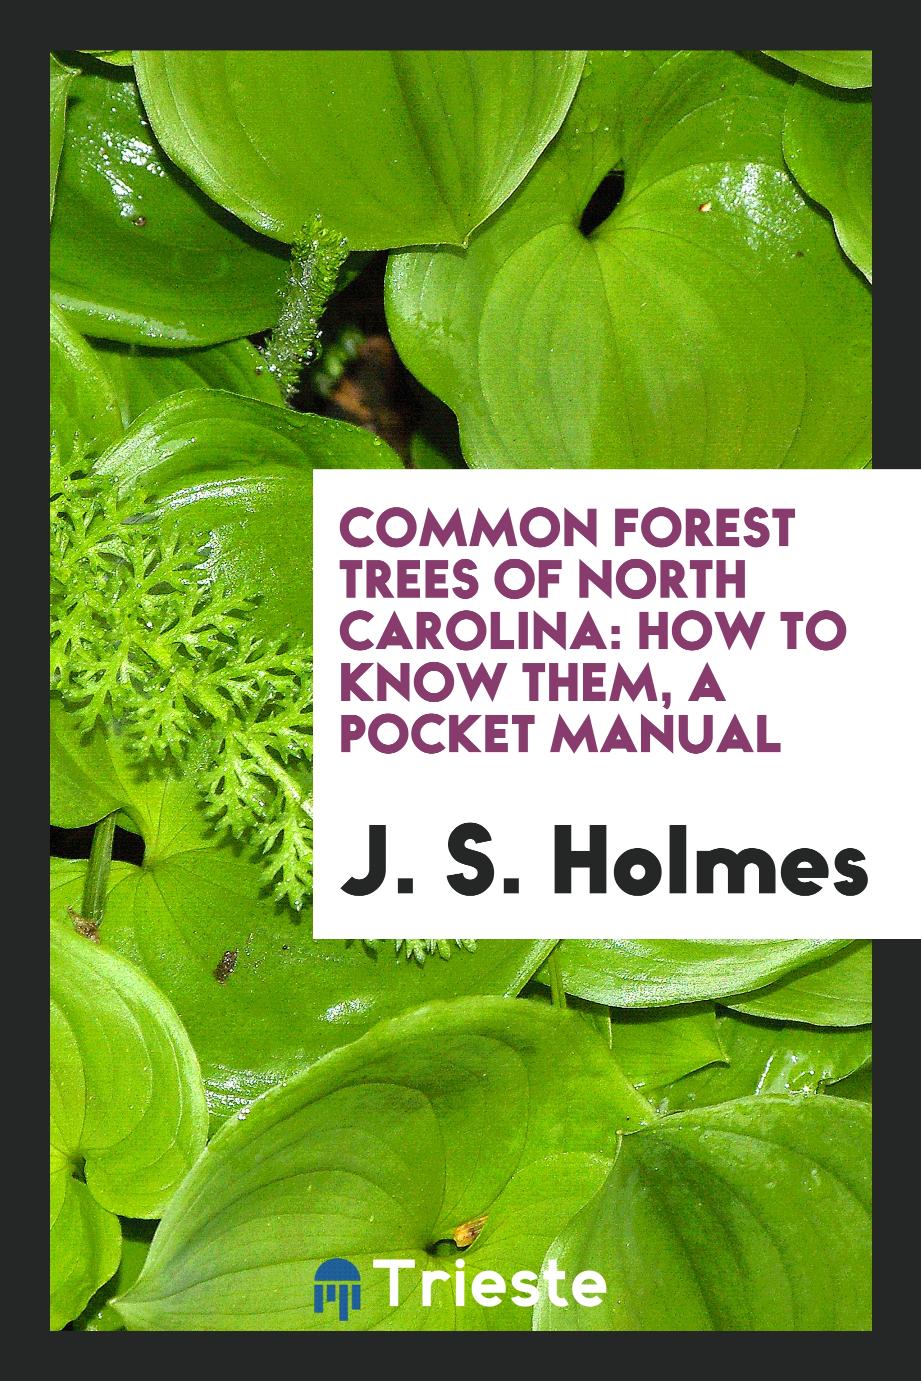 Common forest trees of North Carolina: how to know them, a pocket manual